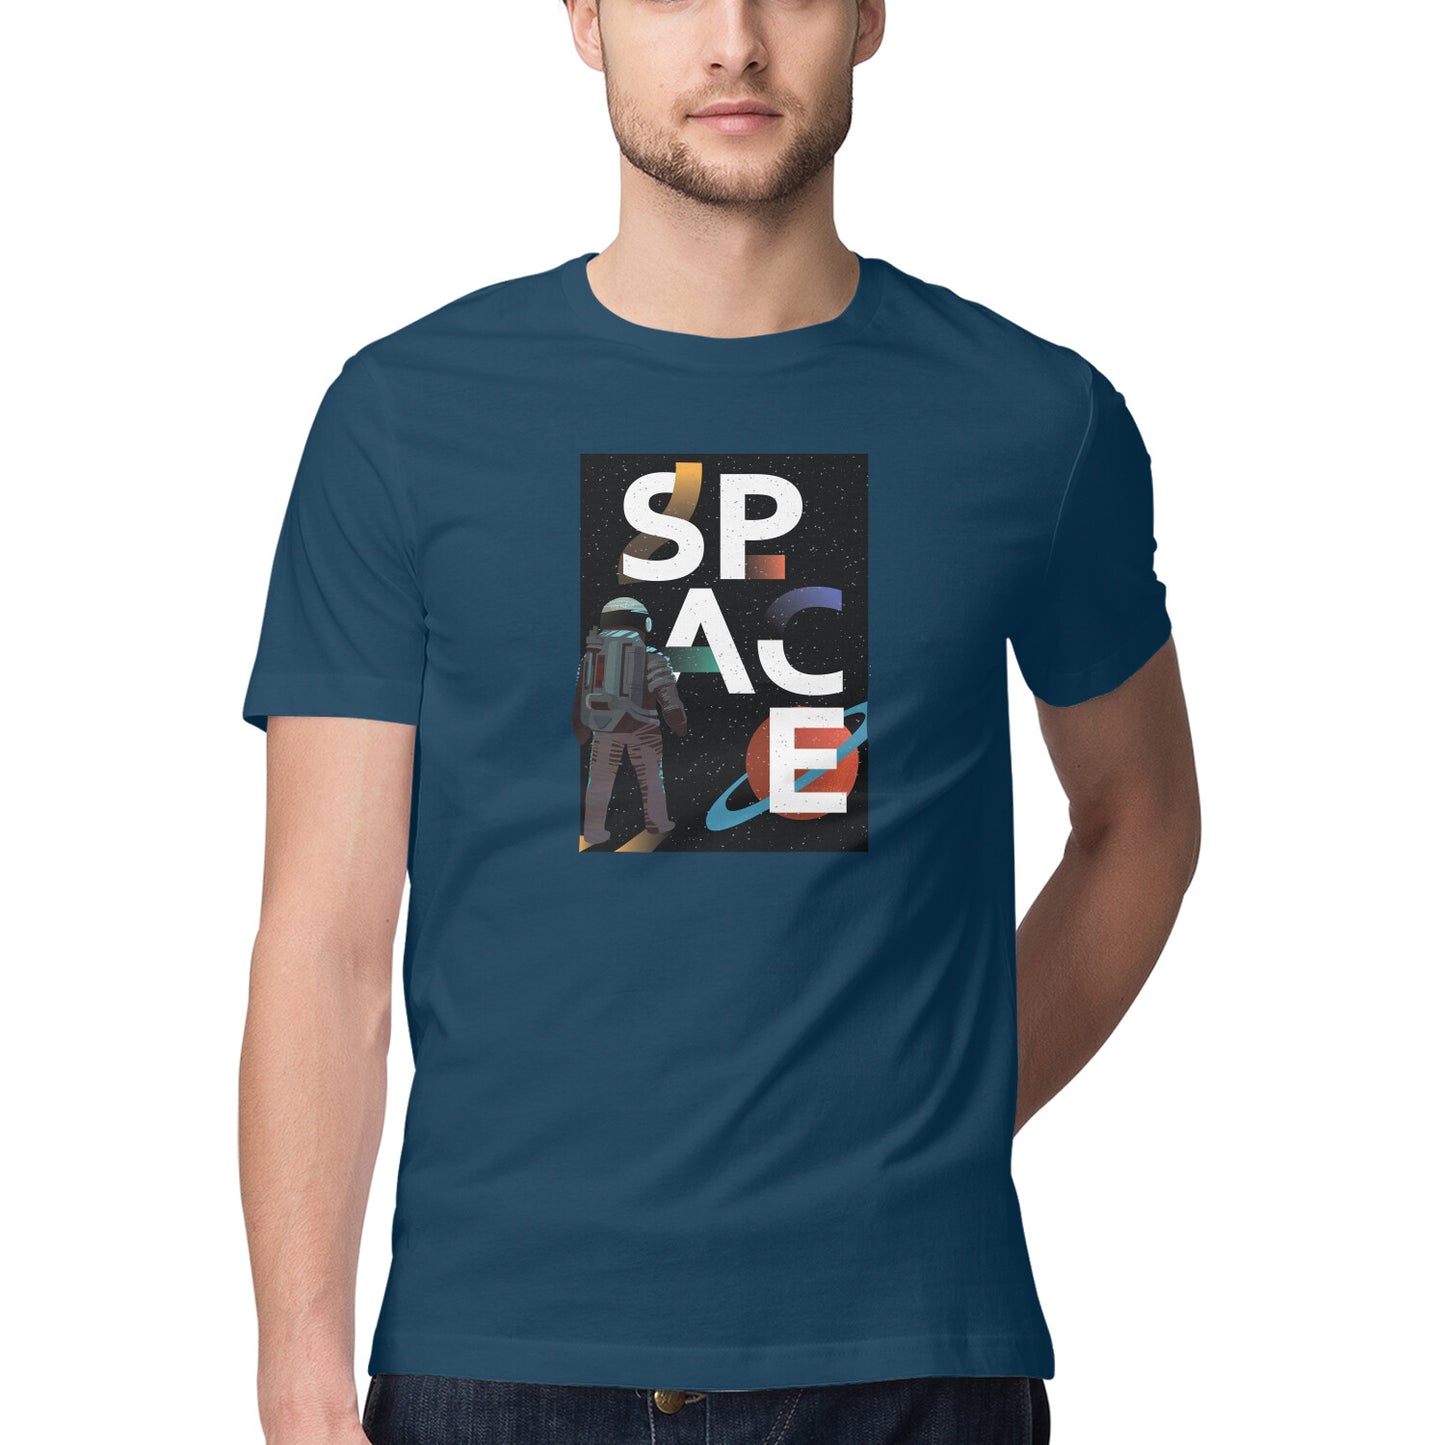 Space Art 10 Printed Graphic T-Shirt